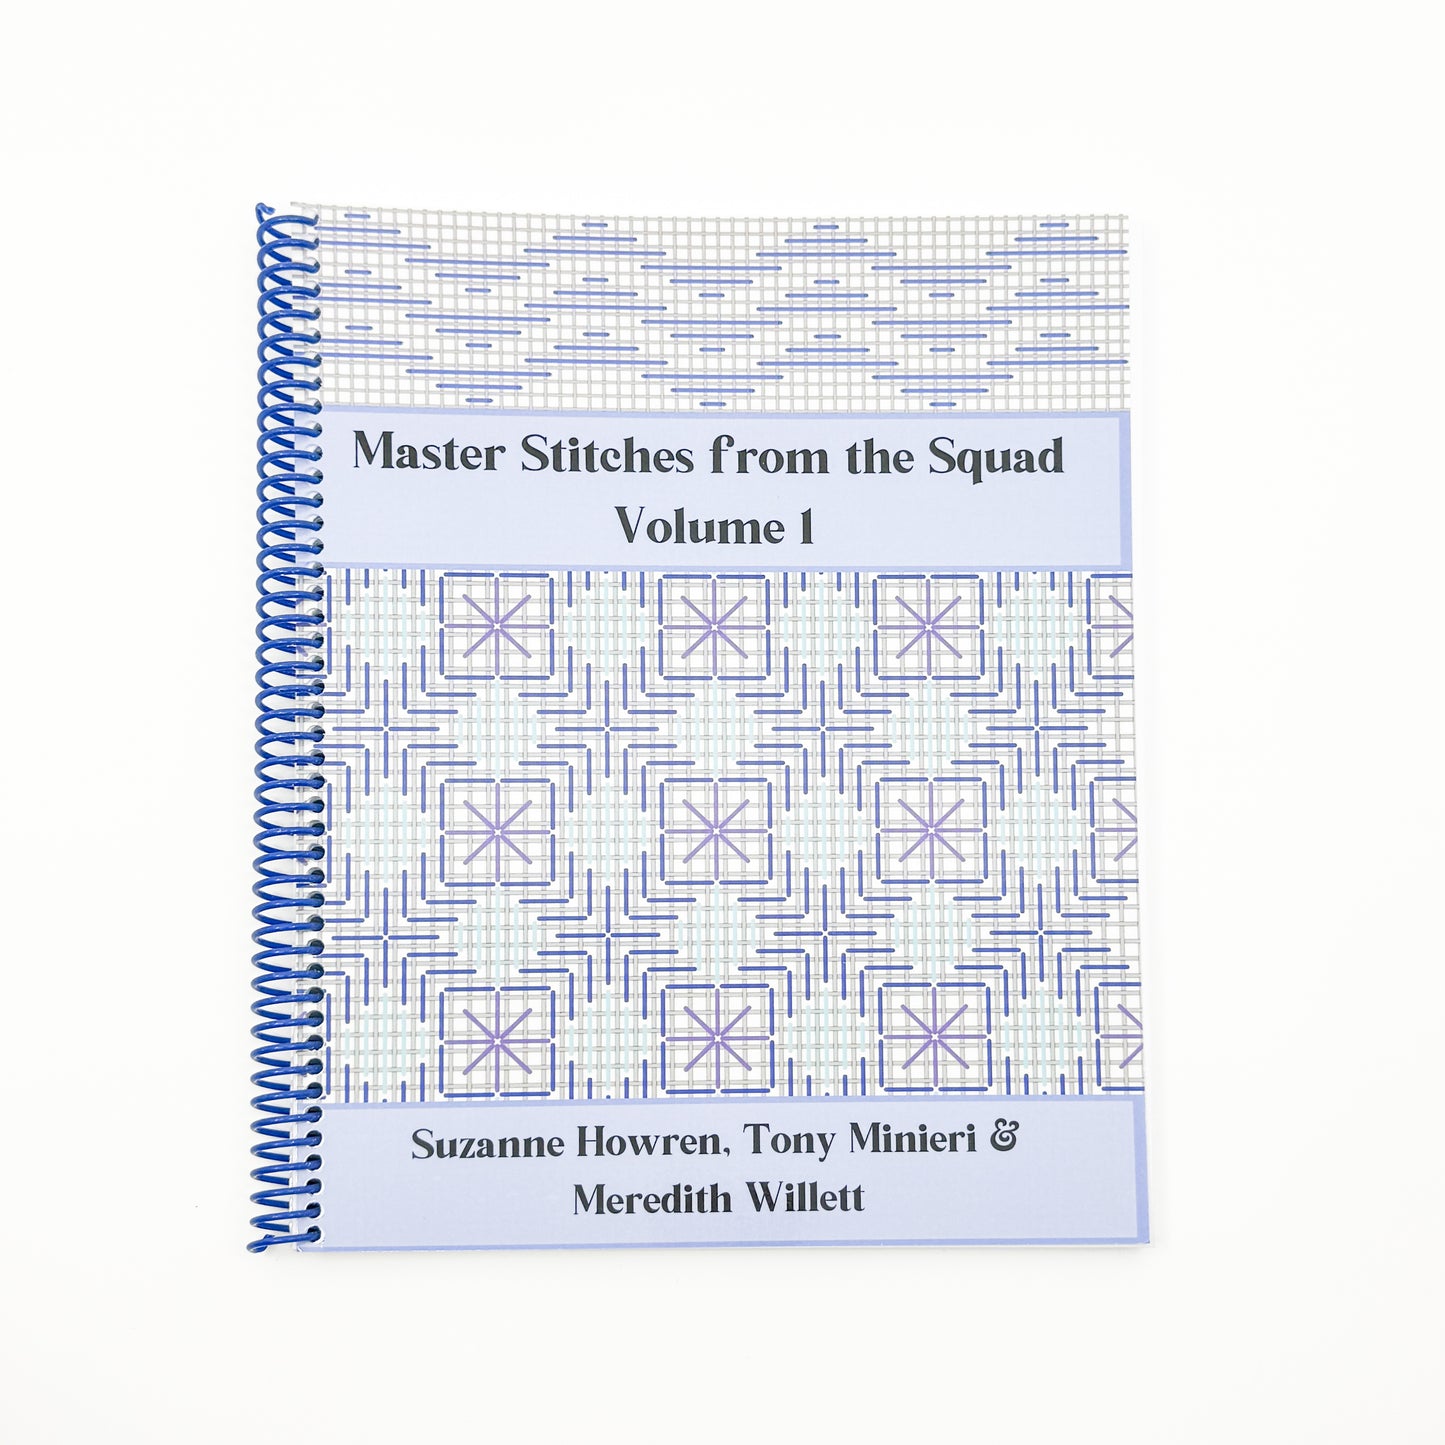 "Master Stitches from the Squad" Volume 1